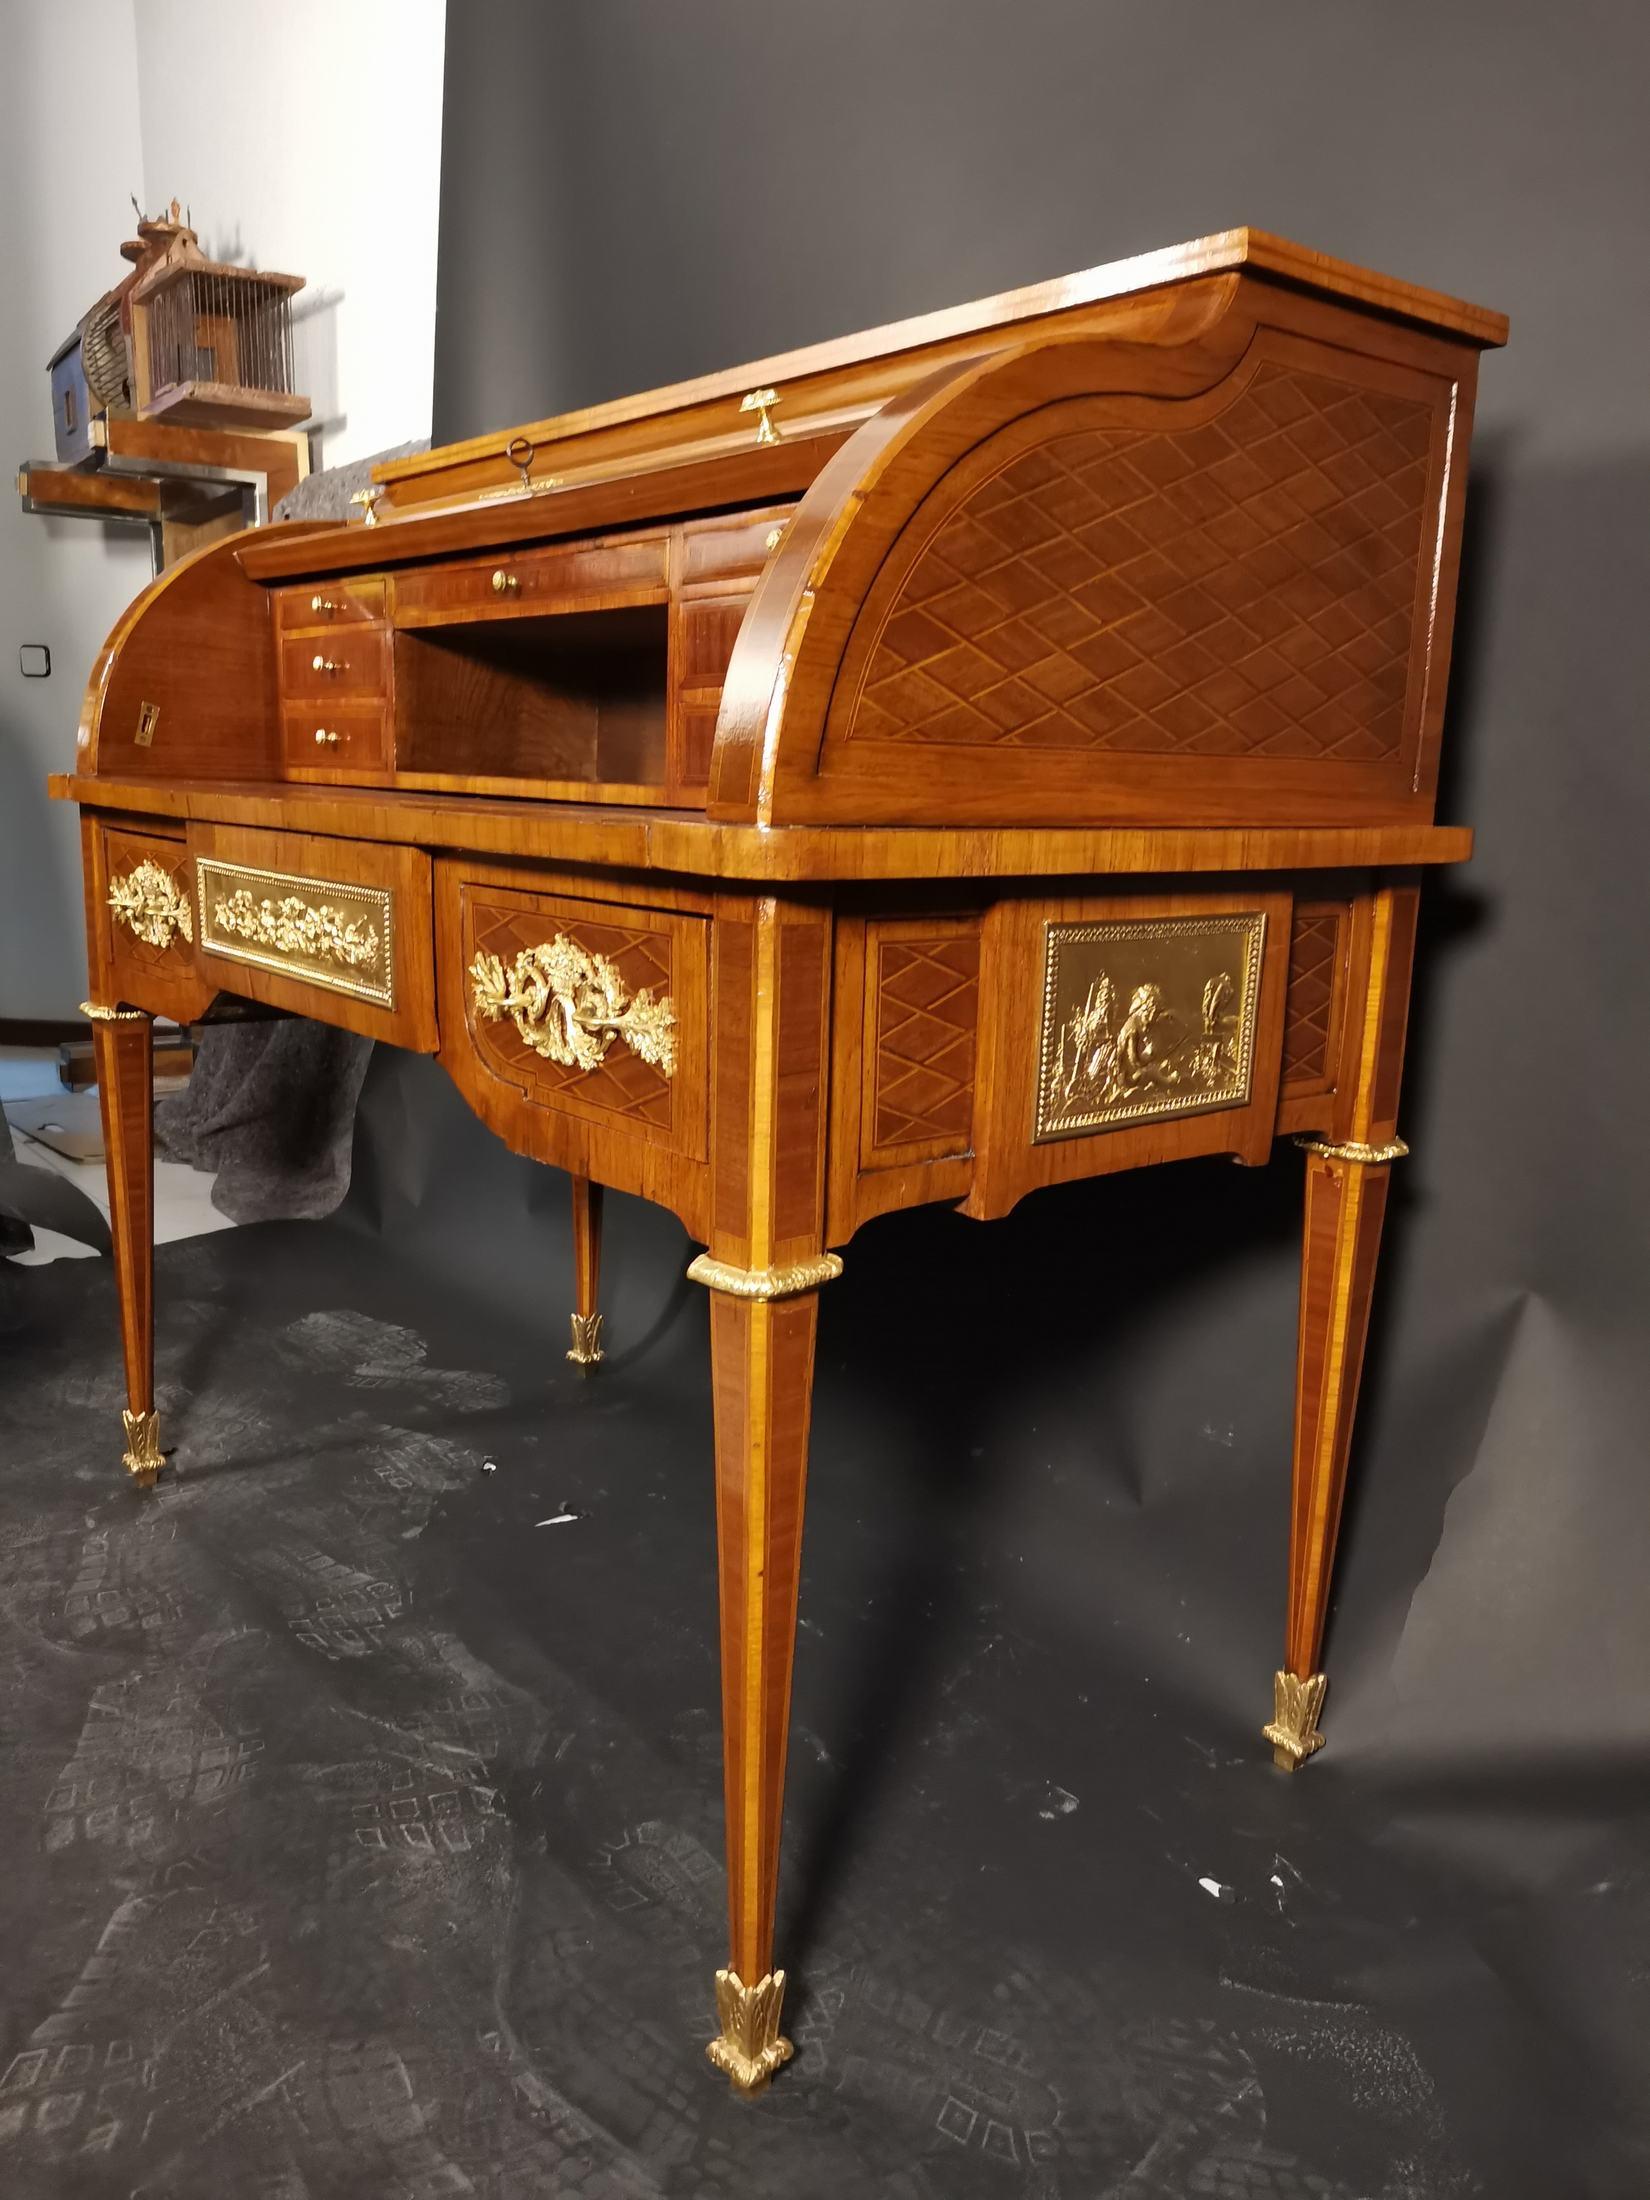 19th century cylinder desk in Louis XVI style Marquetry,
rich gilded bronze ornamentation. 
Three drawers in the belt. 
The office is open to the public and has a fold-out table for credit that measures; this shelf is upholstered in brown